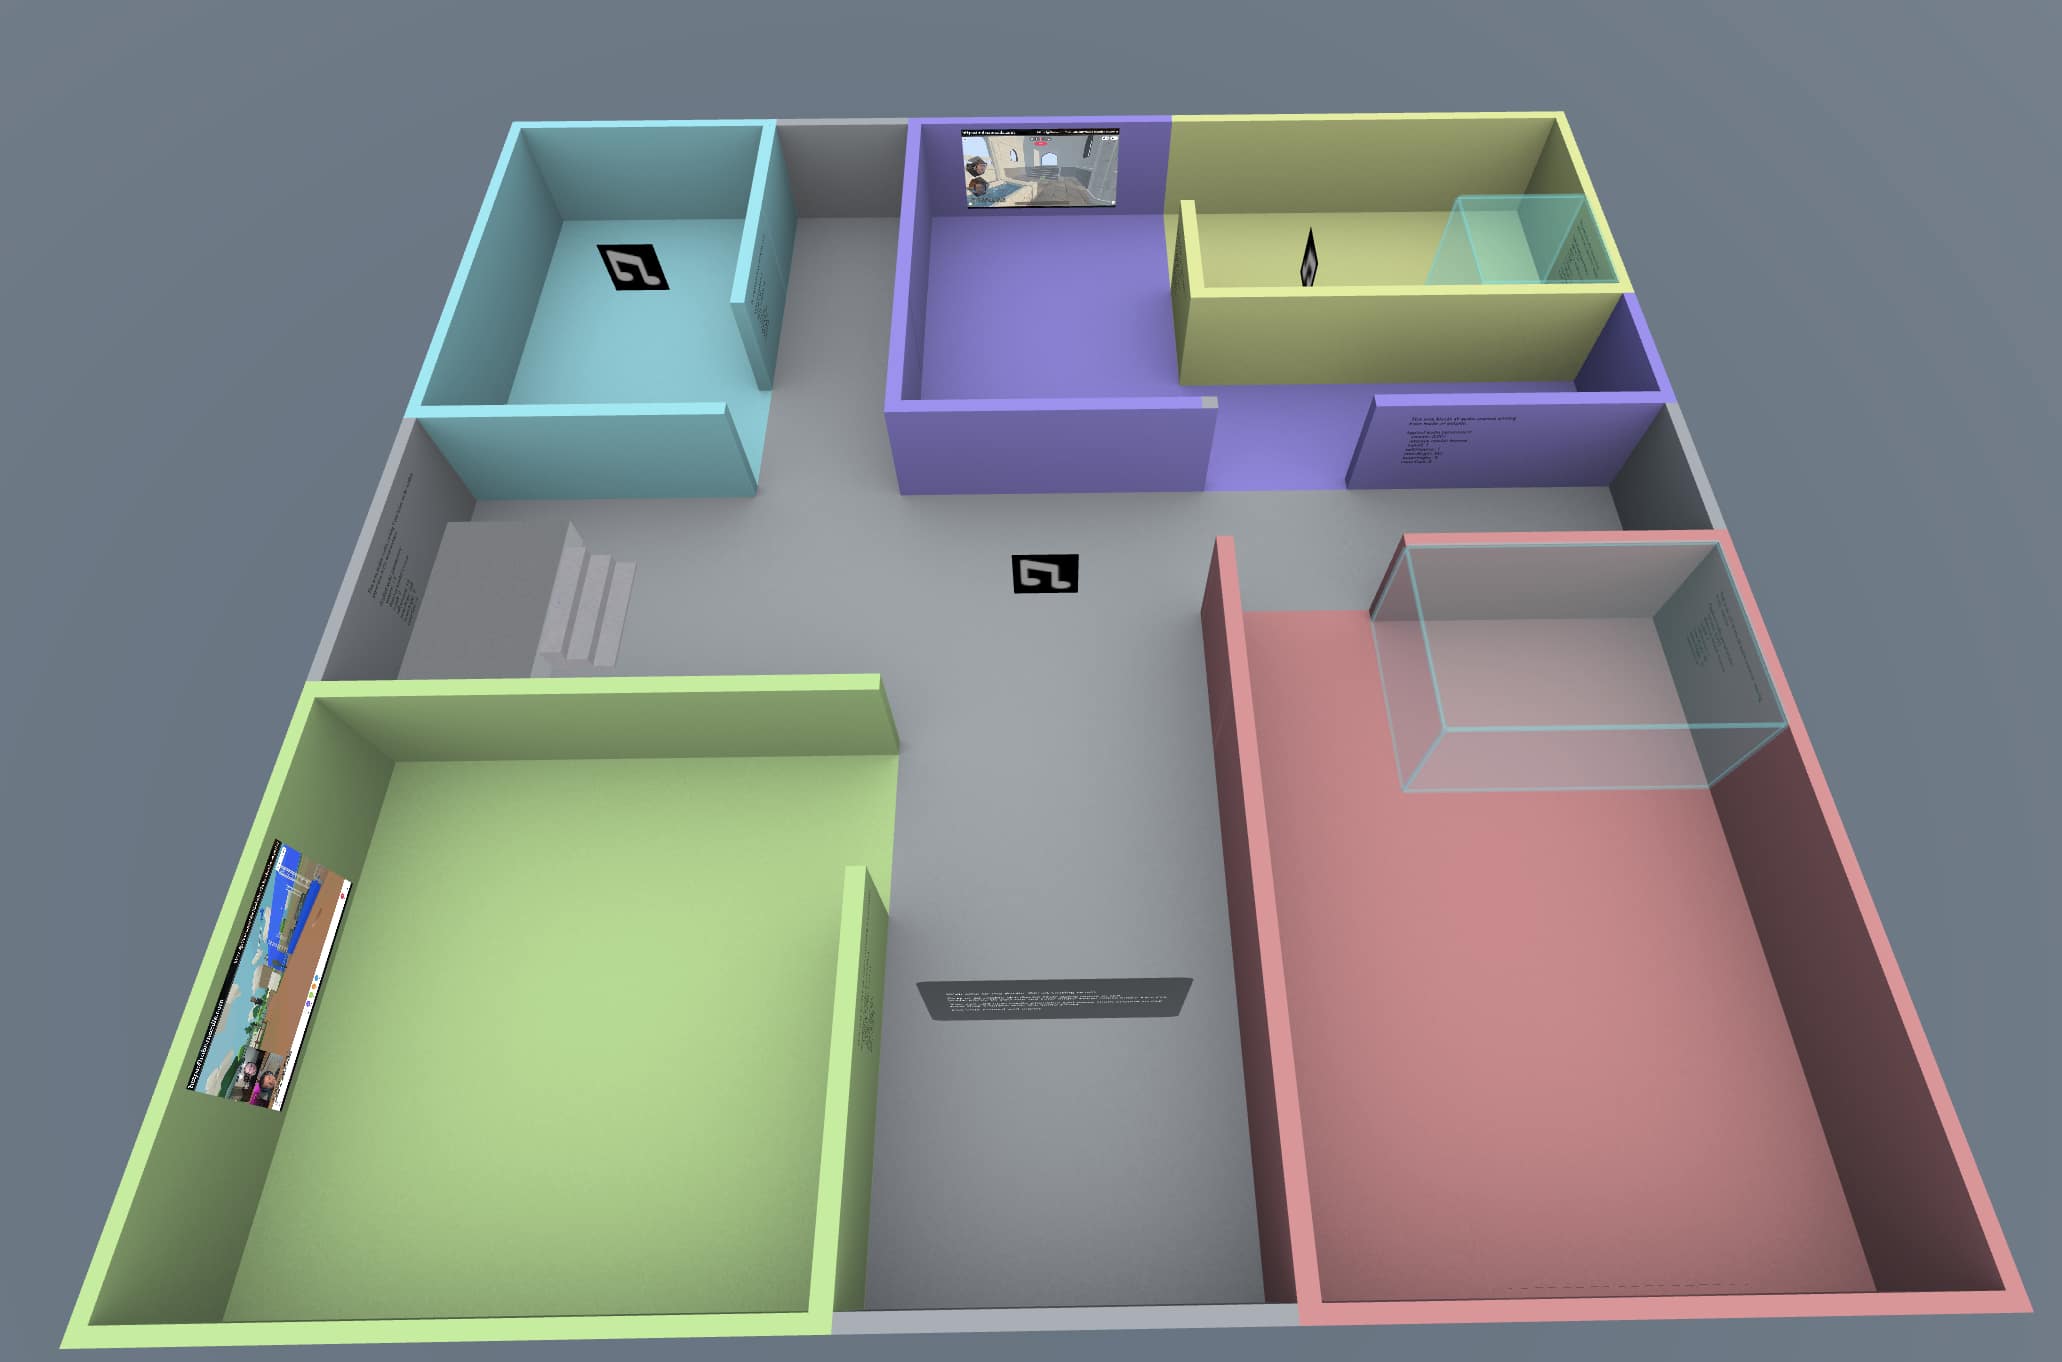 audio zones test space, top down view of multi-colored rooms